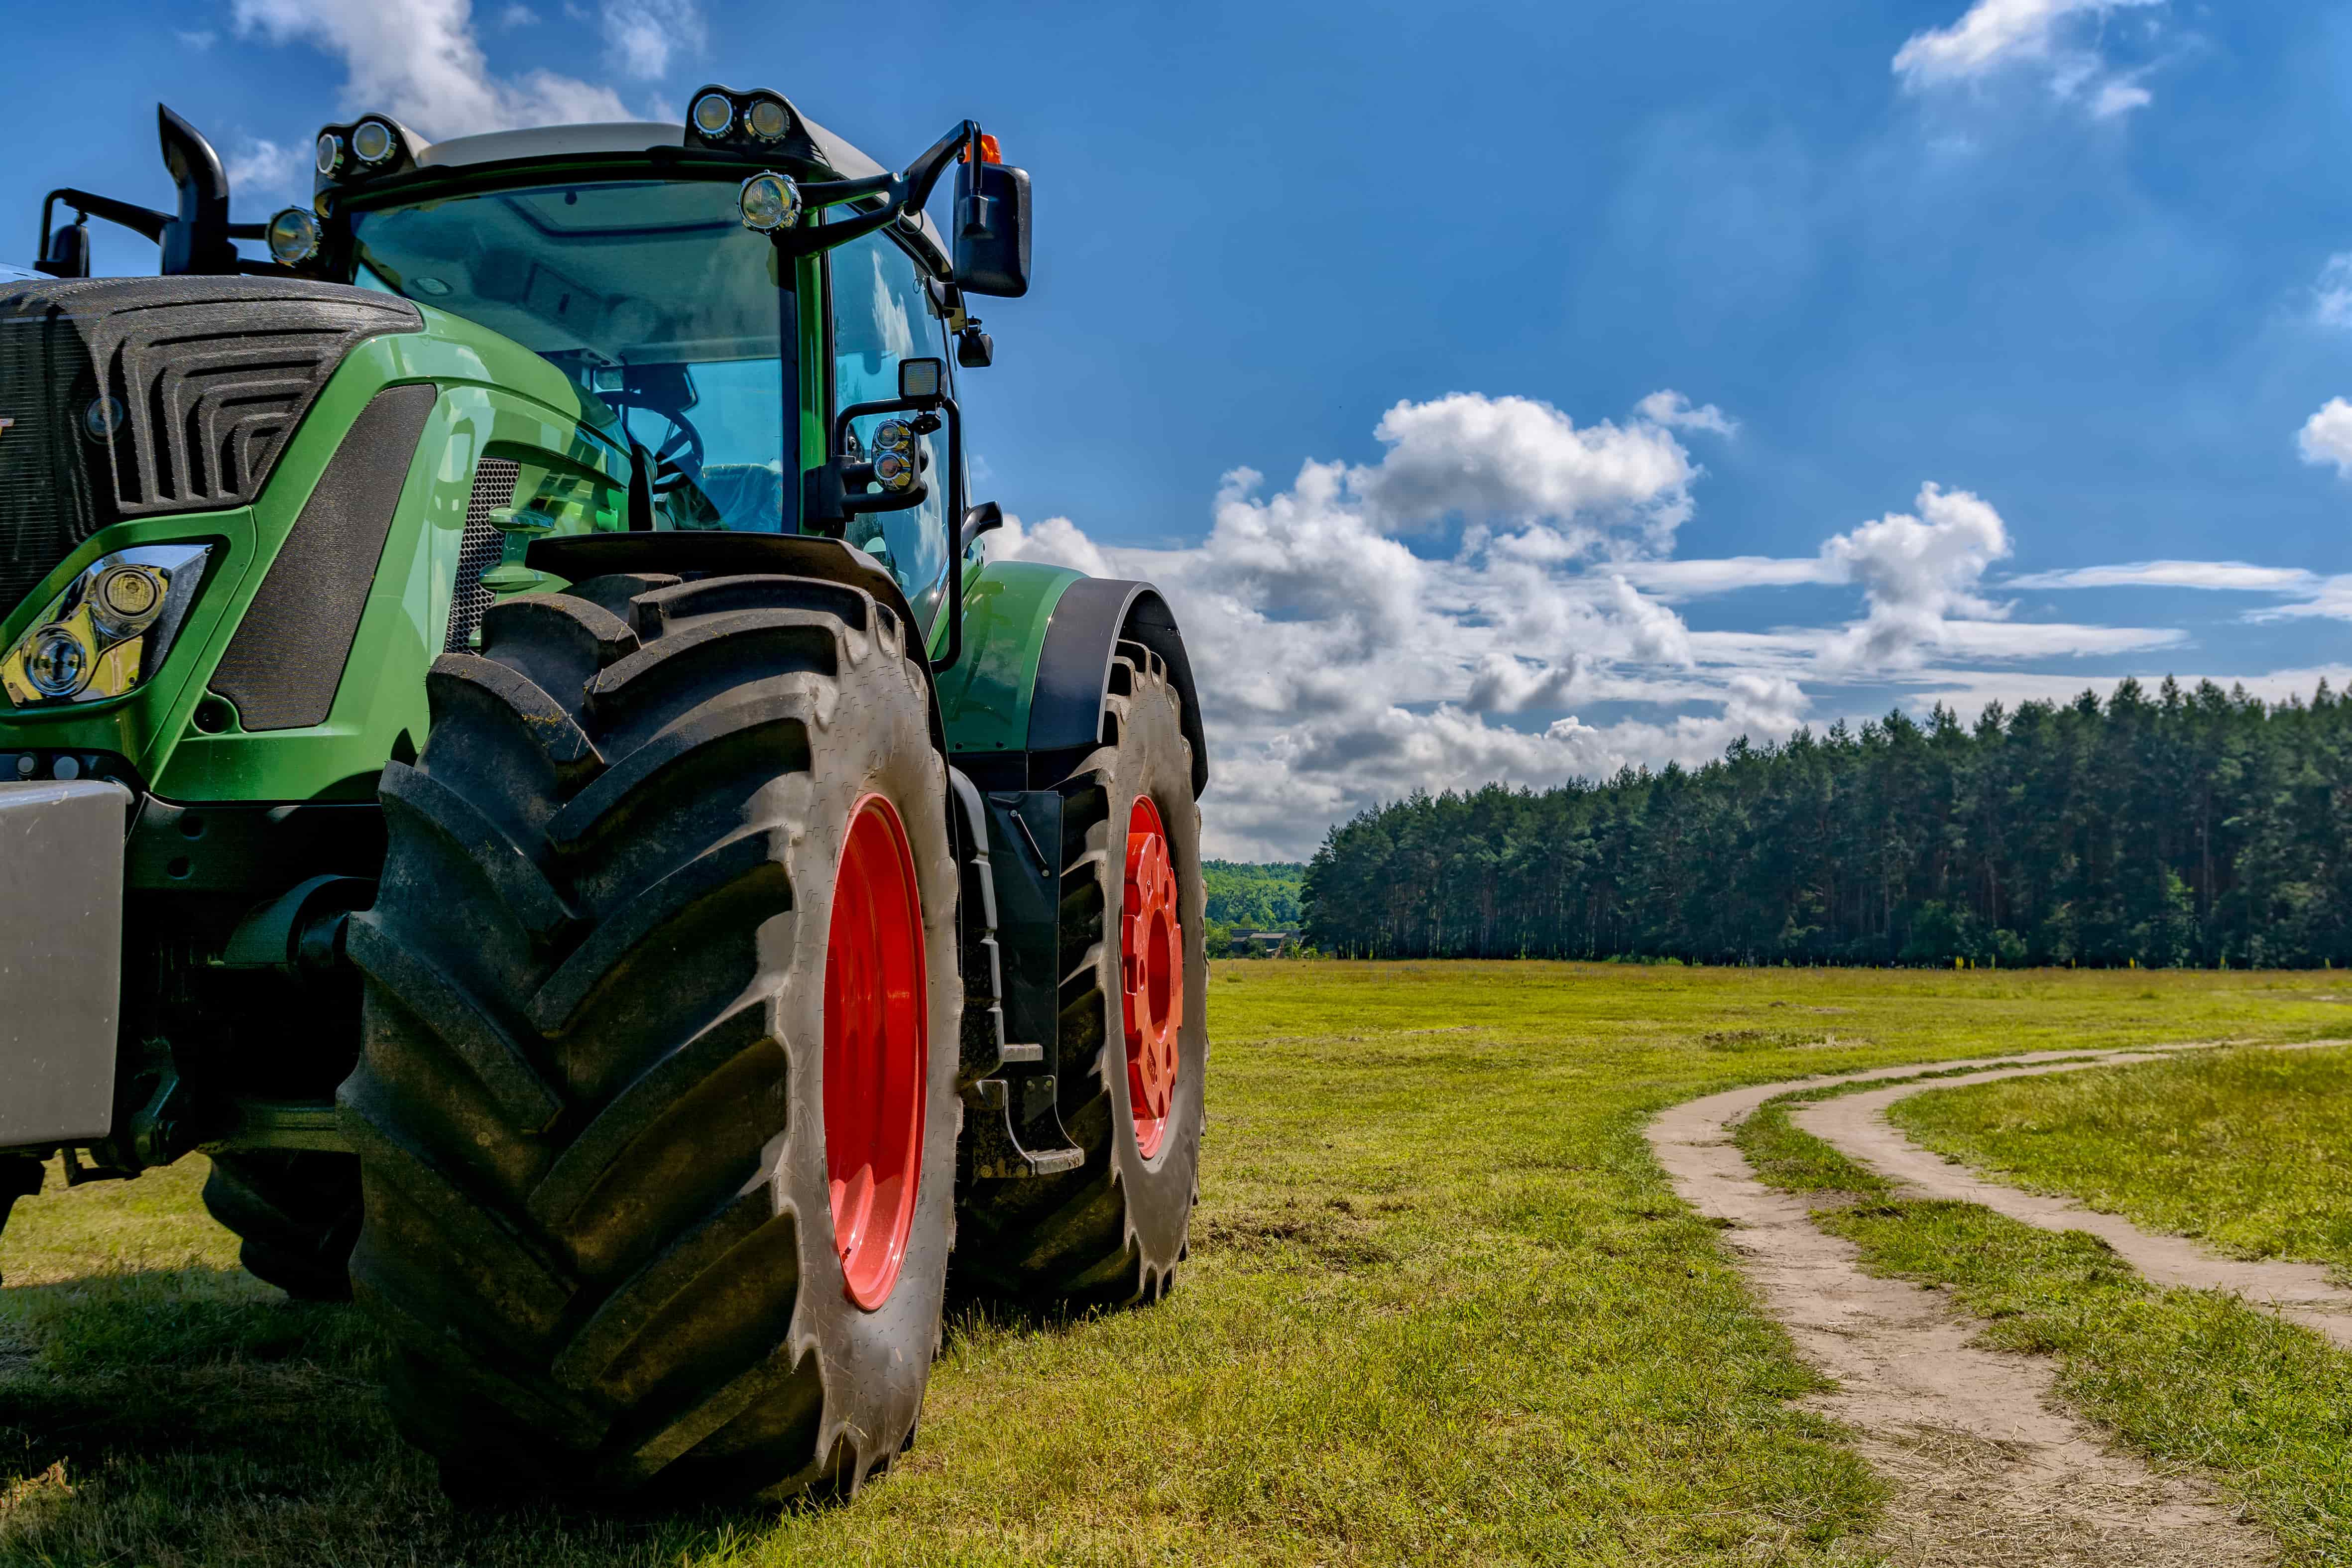 A green farm tractor that has been fitted with R1 agricultural tires for extra traction.